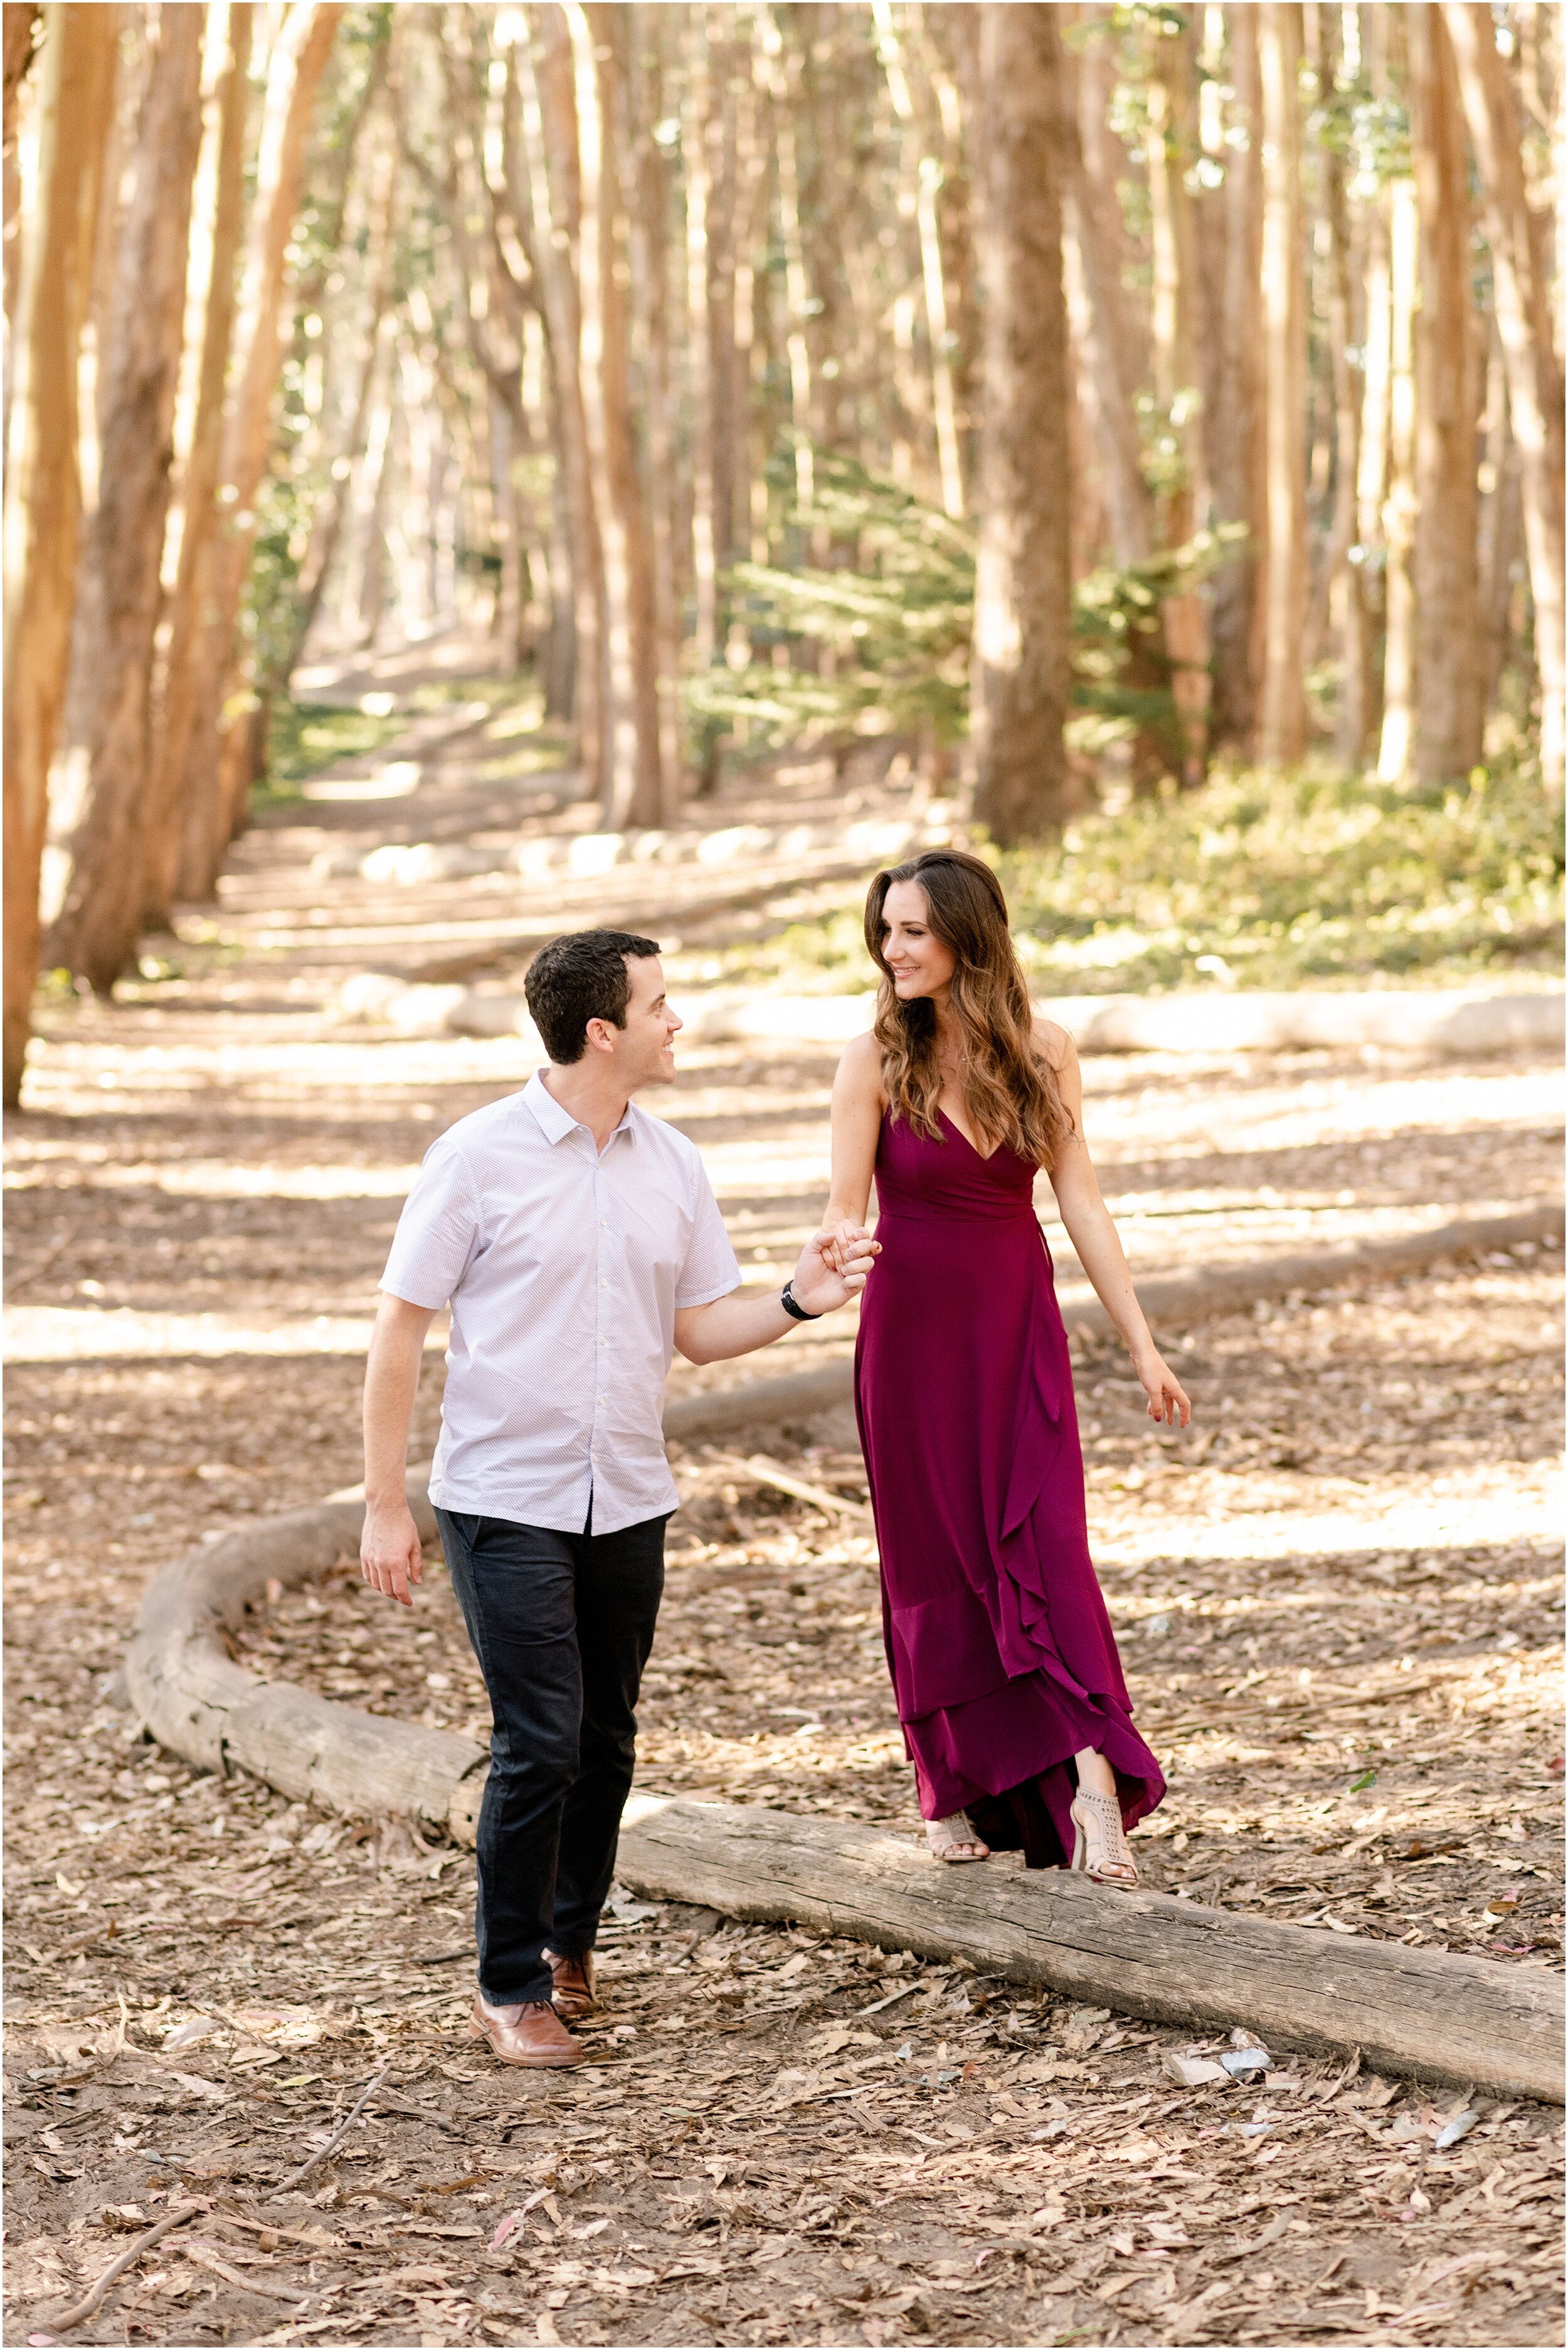 hannah leigh photography Baker Beach, Lovers Lane. Palace of Fine Arts Engagement Session San Franscico, CA_4832.jpg